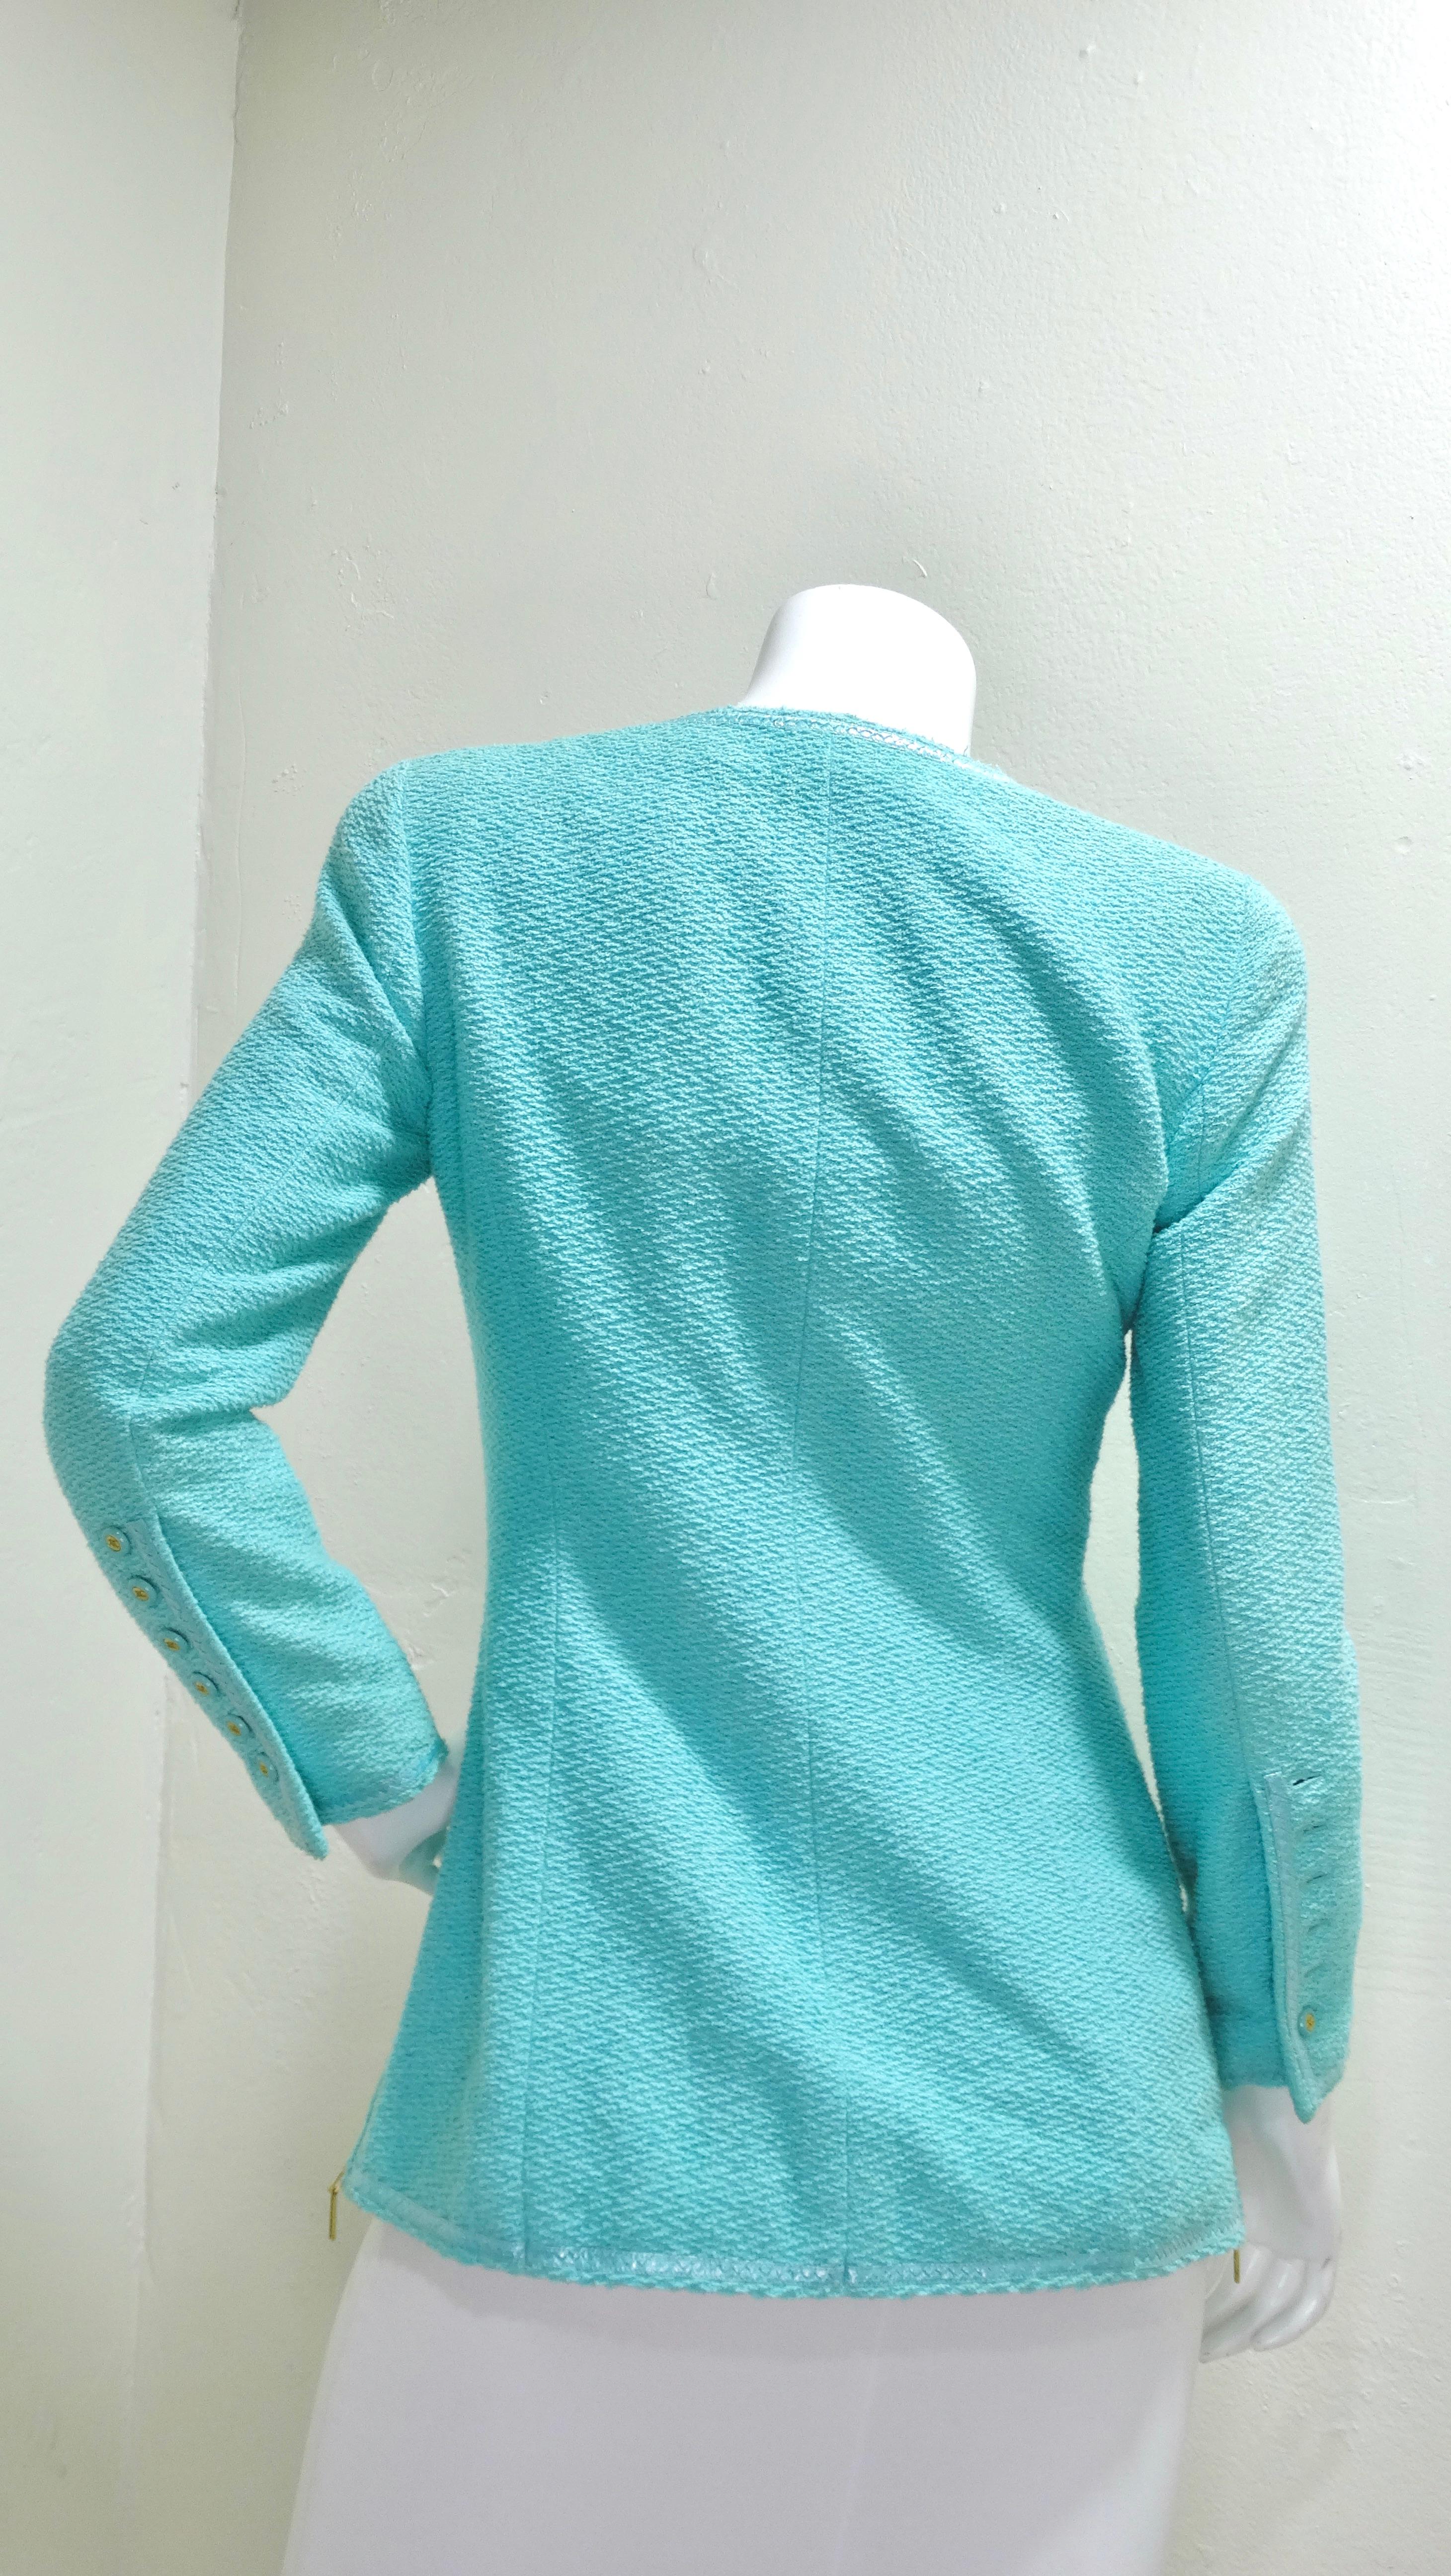 Chanel 1995 Fall Collection Teal Zip-Up Jacket 7